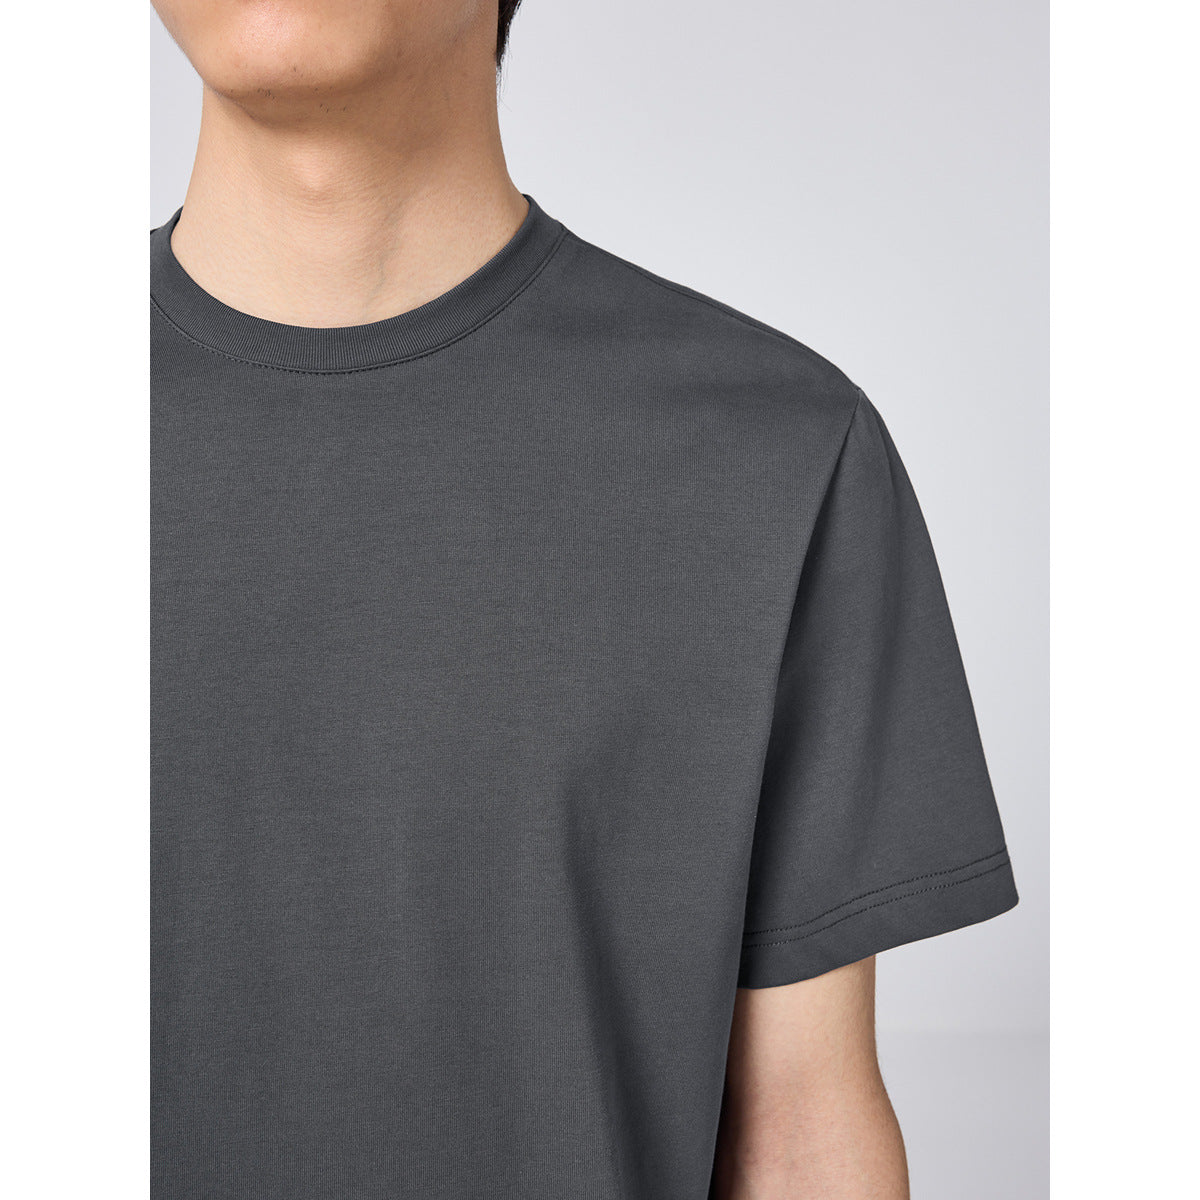 Solid Color Round Neck T-shirt Basic Cool Feeling